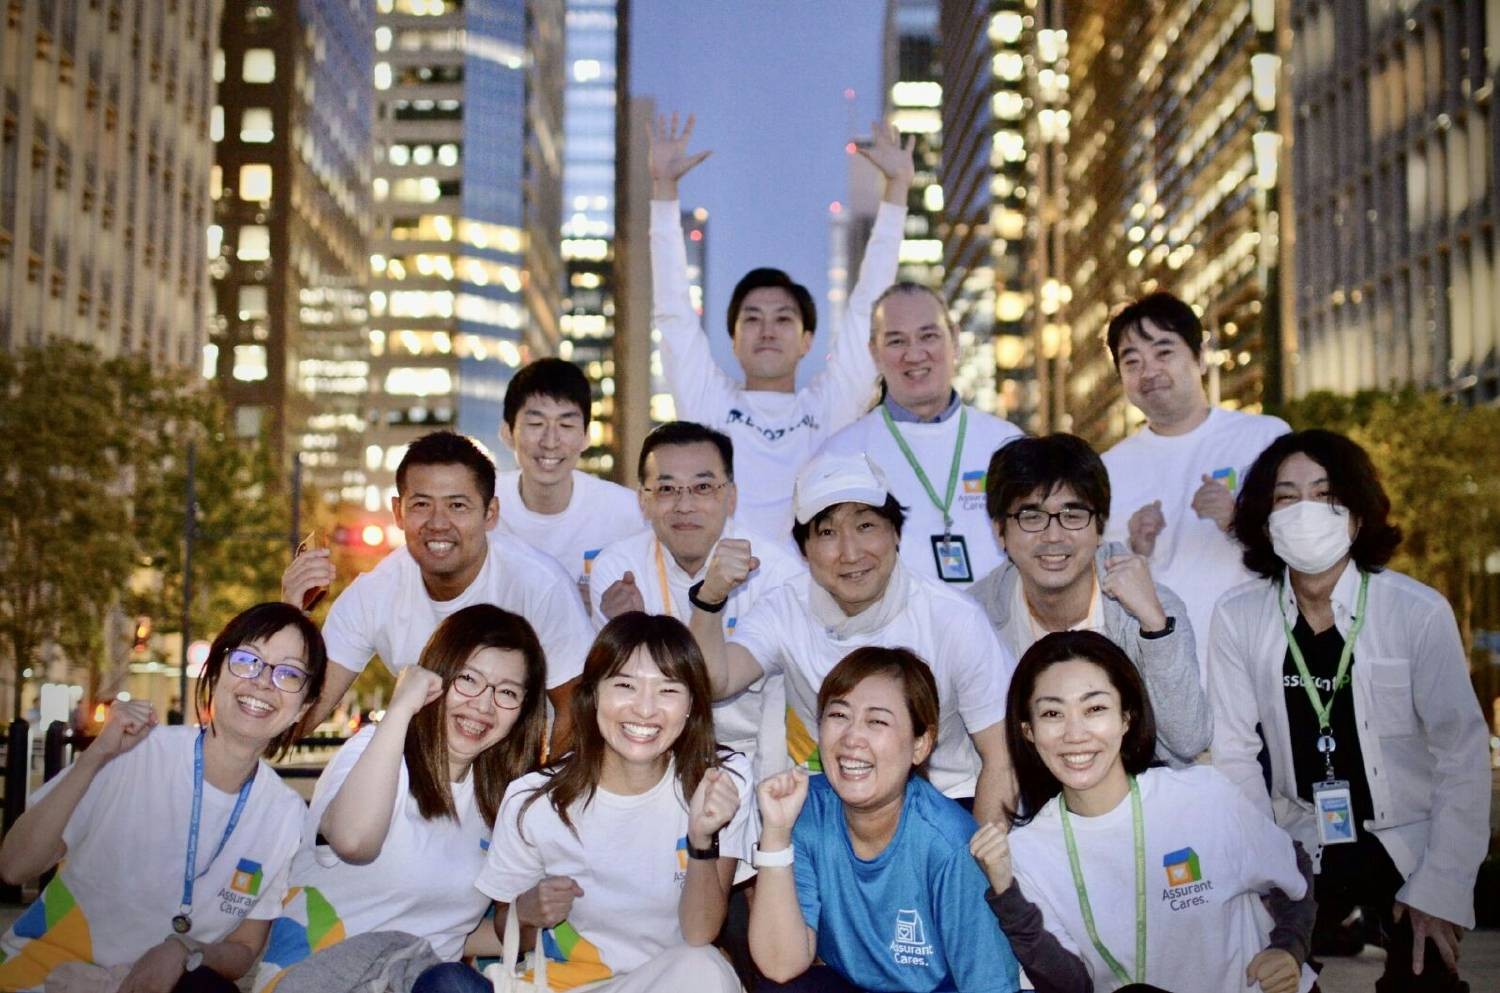 Japanese employees participating in 5K for charity